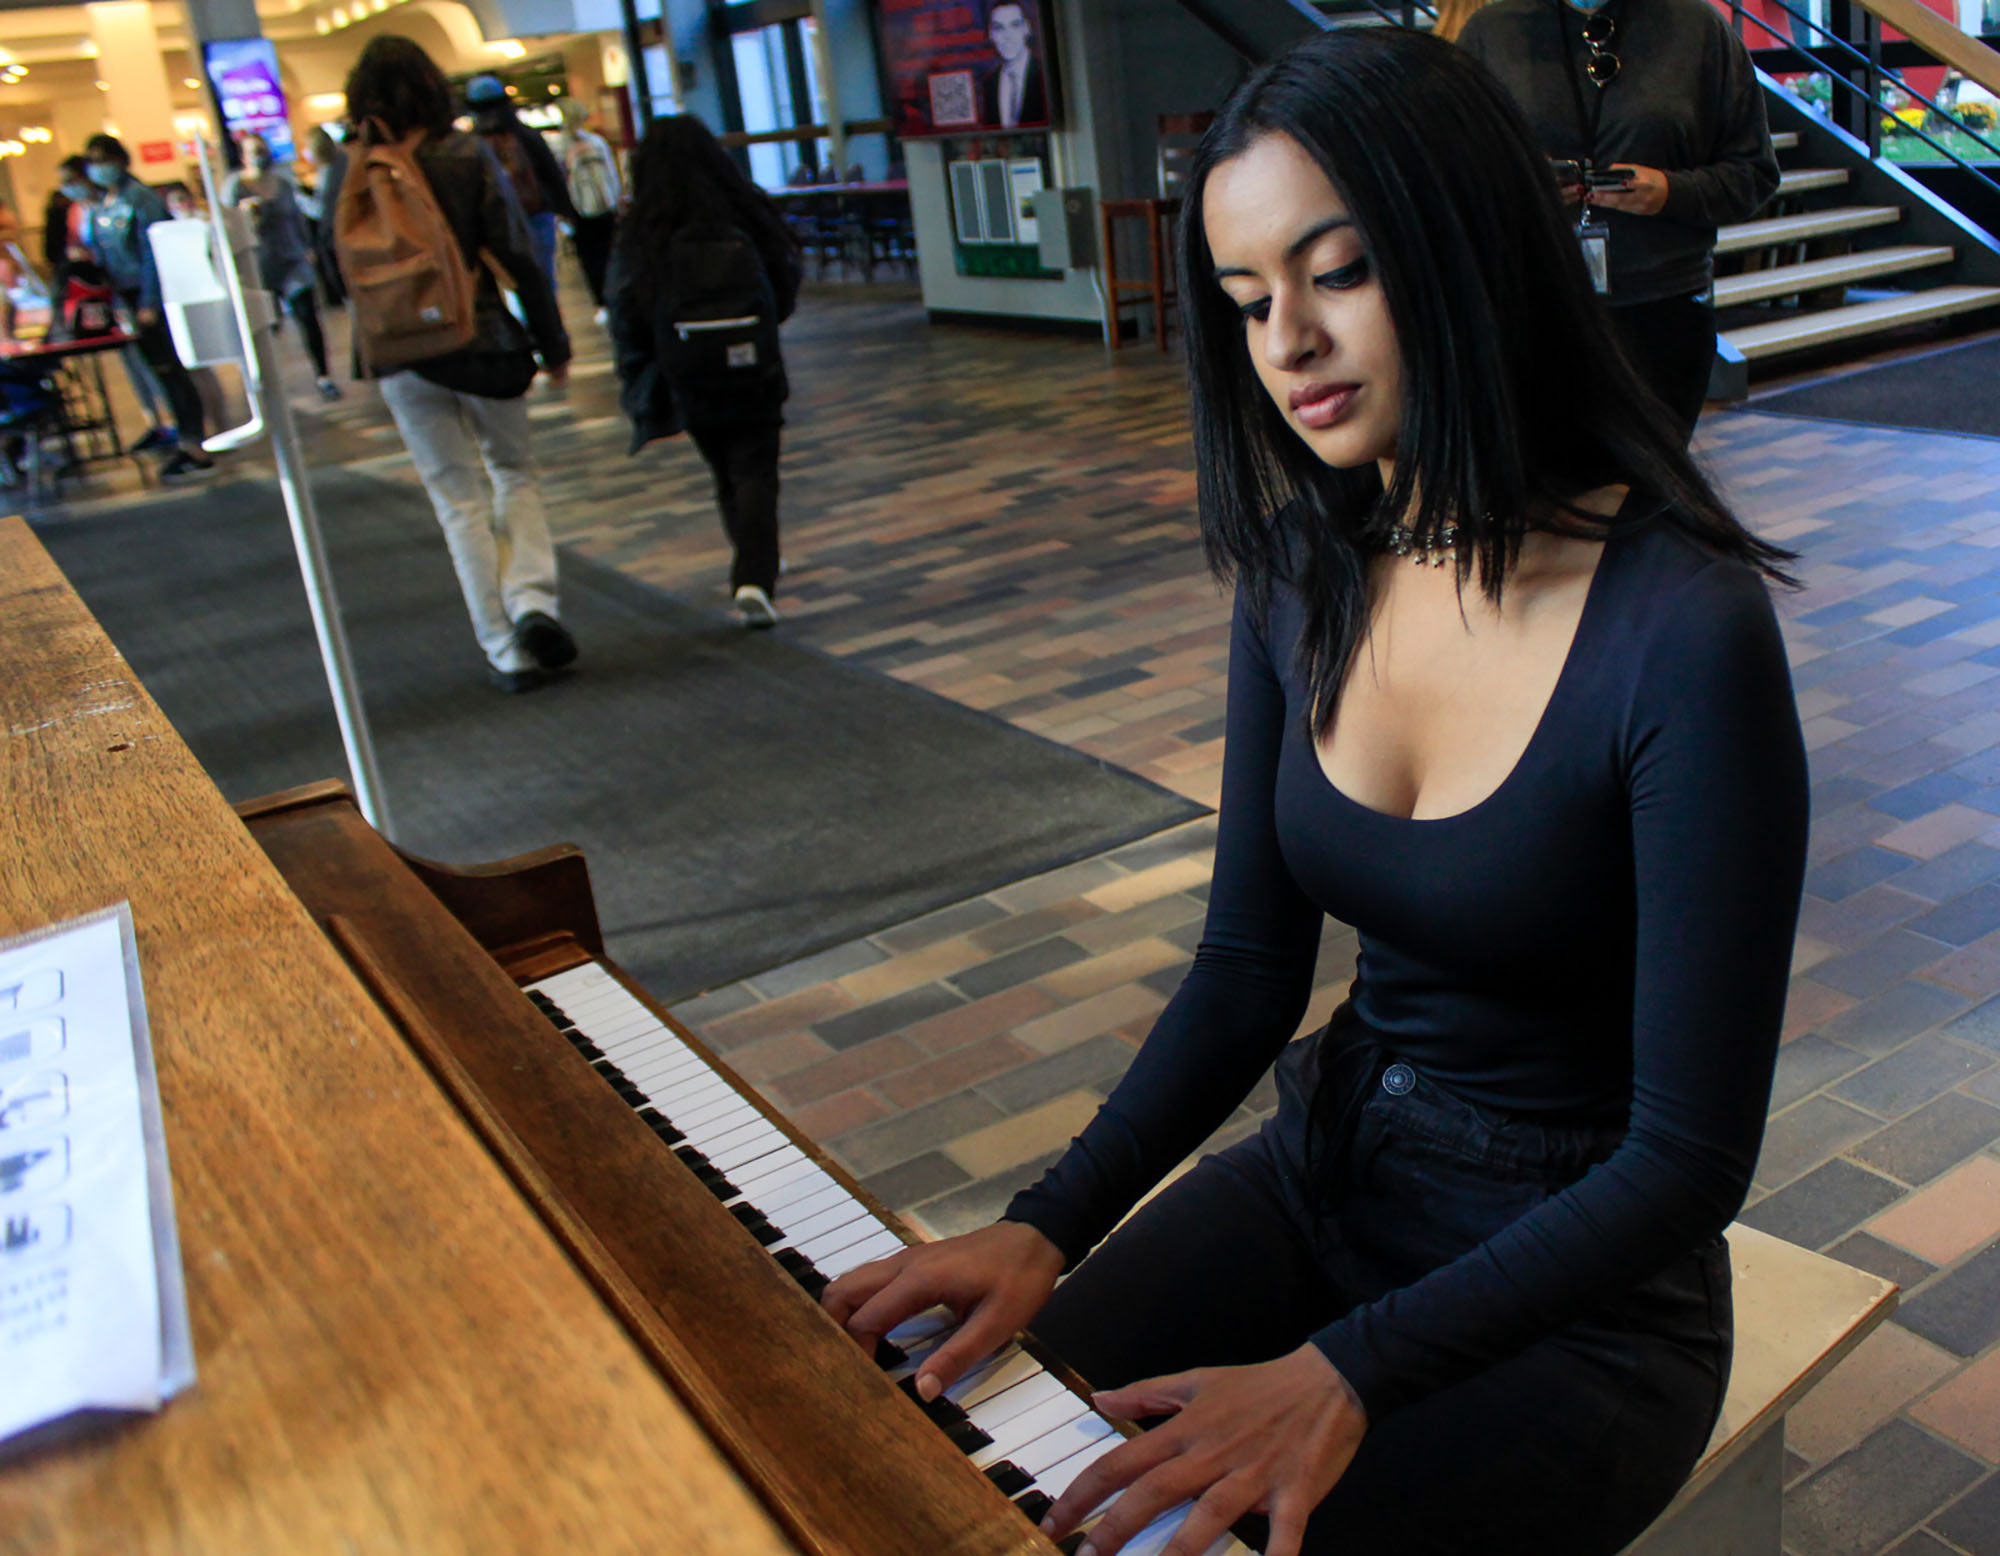 Photo of Musician Radha Rai (QST '21) playing piano at the GSU after undergoing a series of interviews regarding her encounter with famous singer John Legand the day prior. She wears a black top and pants, and looks contently at the piano as she plays.